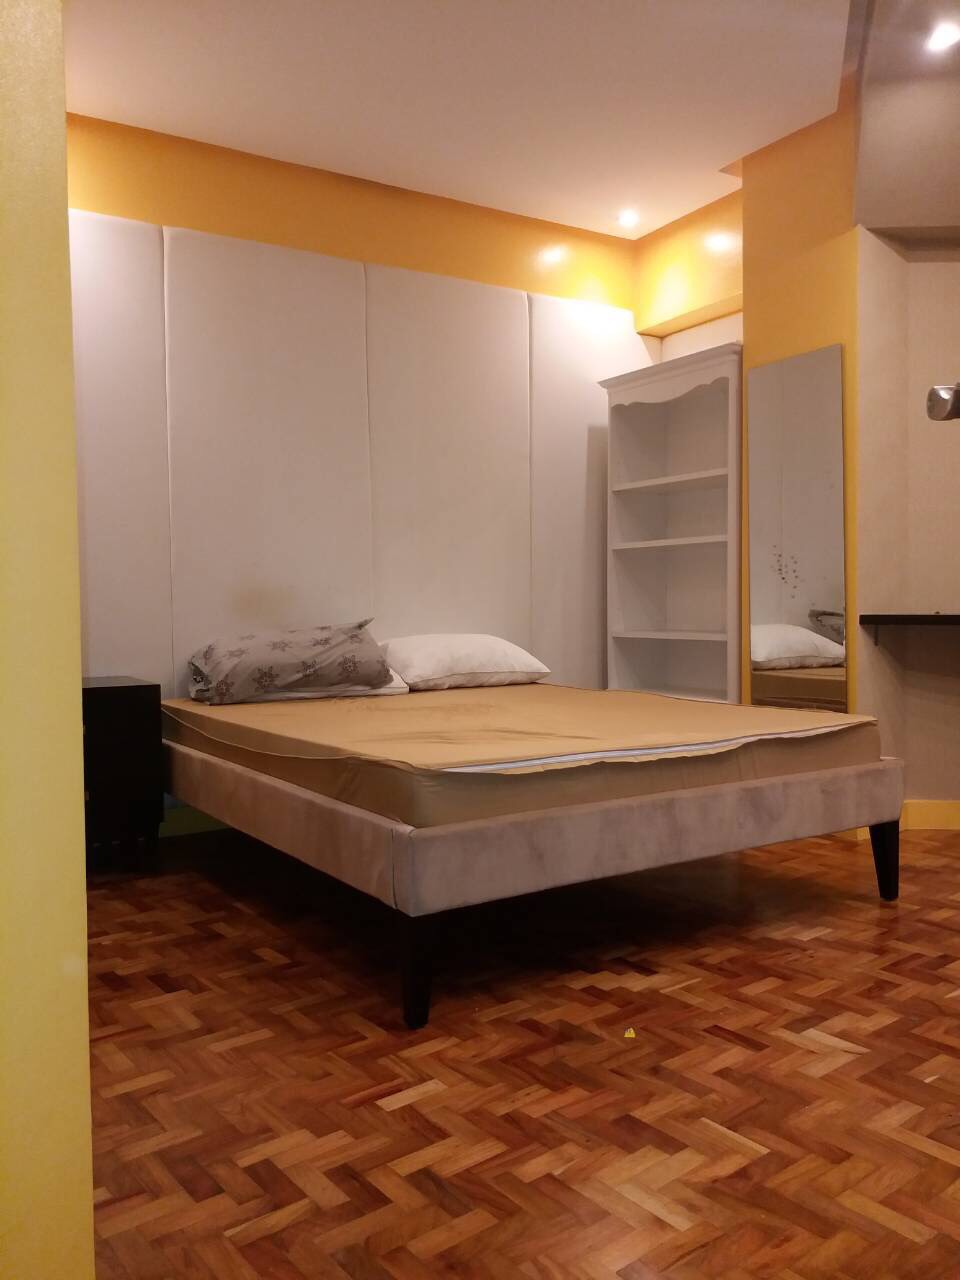 For Rent, Almond, Two Serendra, BGC, Taguig City Bedroom 2